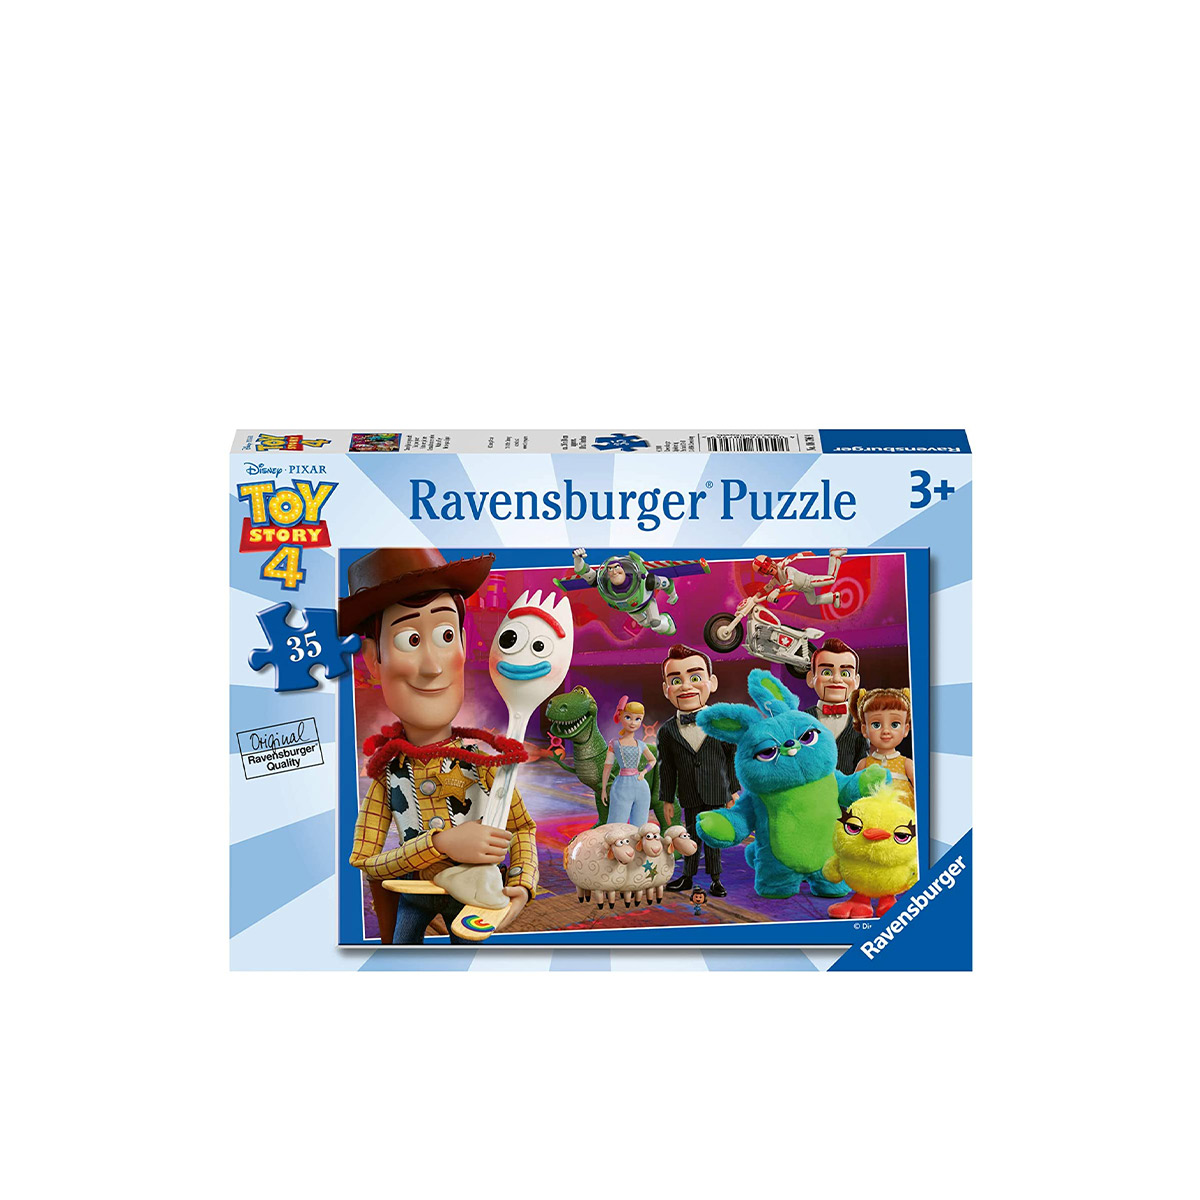 Ravensburger Disney Toy Story 4 35 Piece Jigsaw Puzzle For Kids Age 3 Years and 